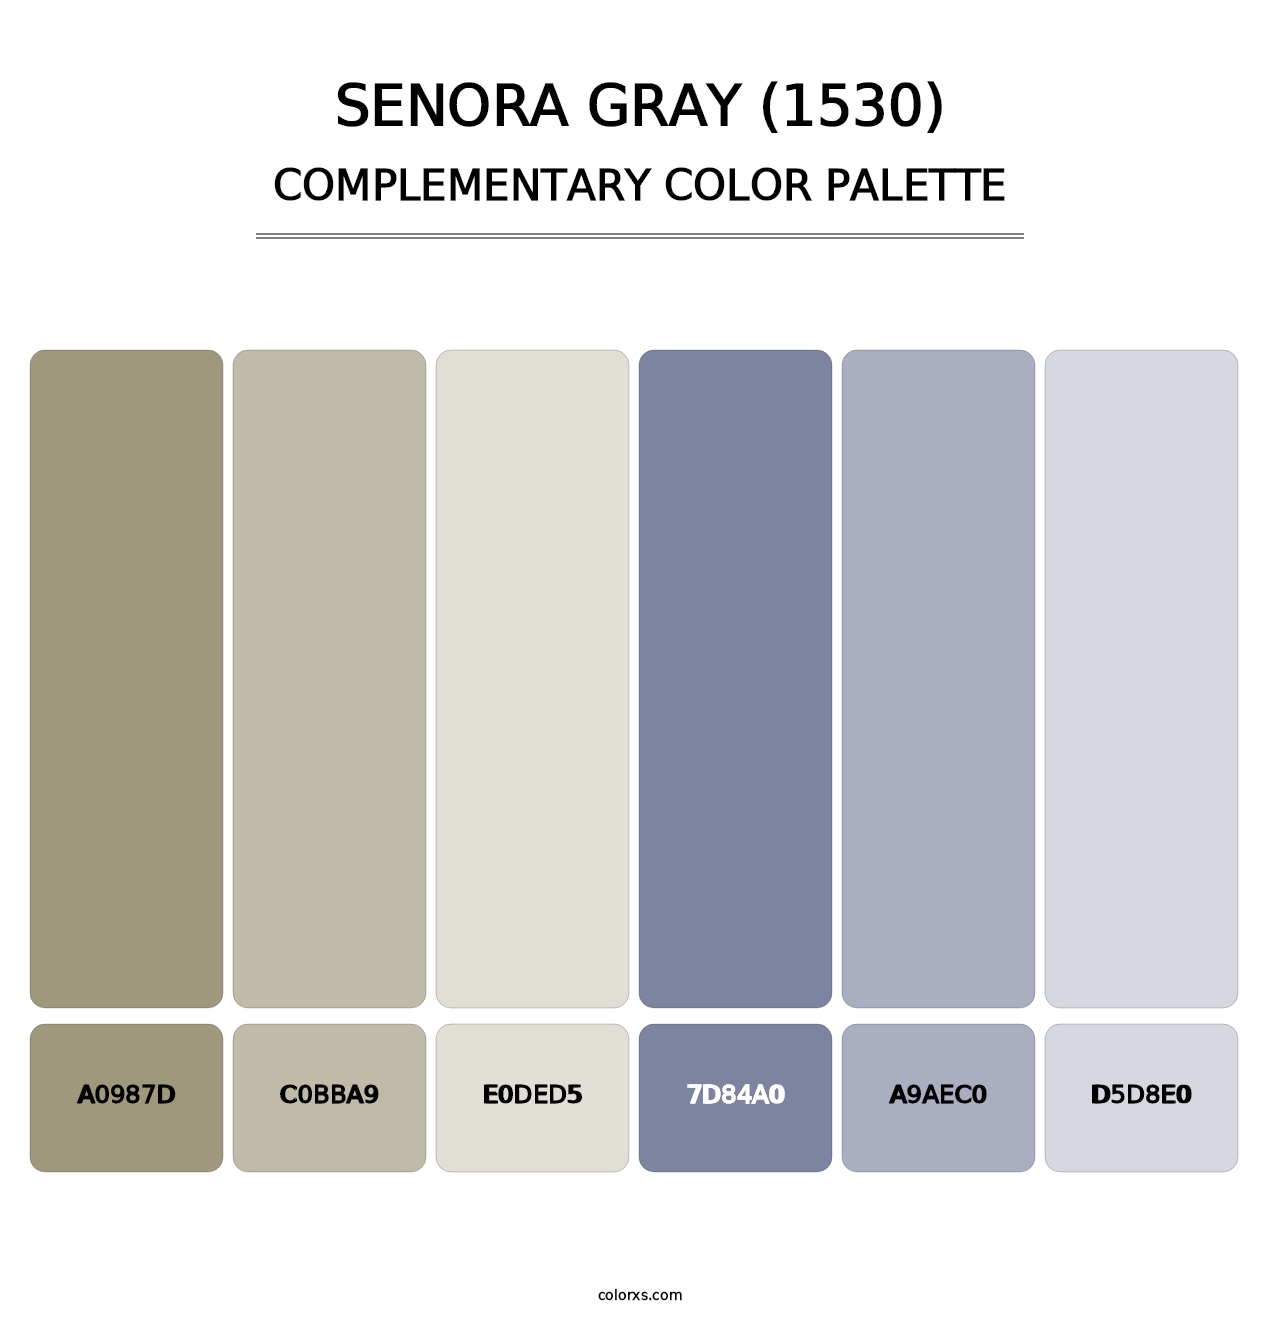 Senora Gray (1530) - Complementary Color Palette